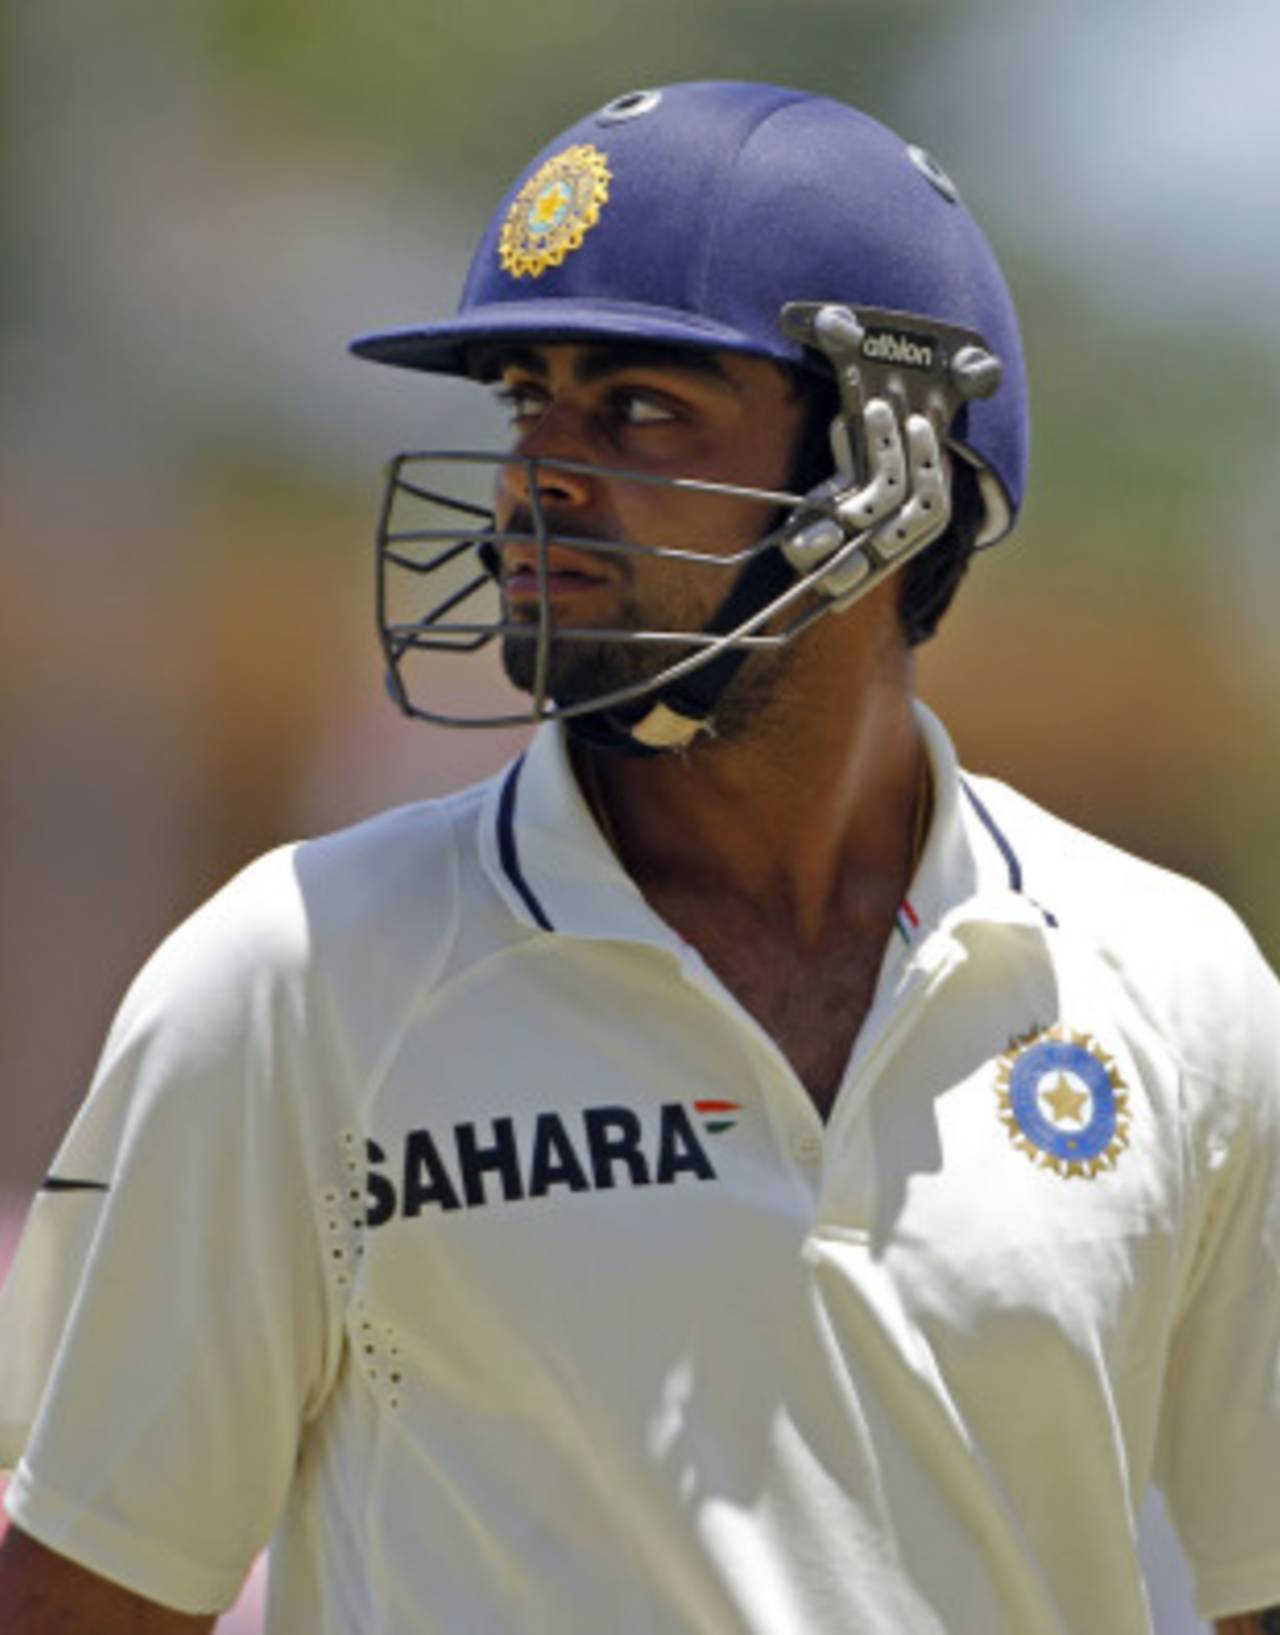 After scoring 4 on Test debut: "It is frustrating when you prepare well and don't score runs"&nbsp;&nbsp;&bull;&nbsp;&nbsp;Associated Press